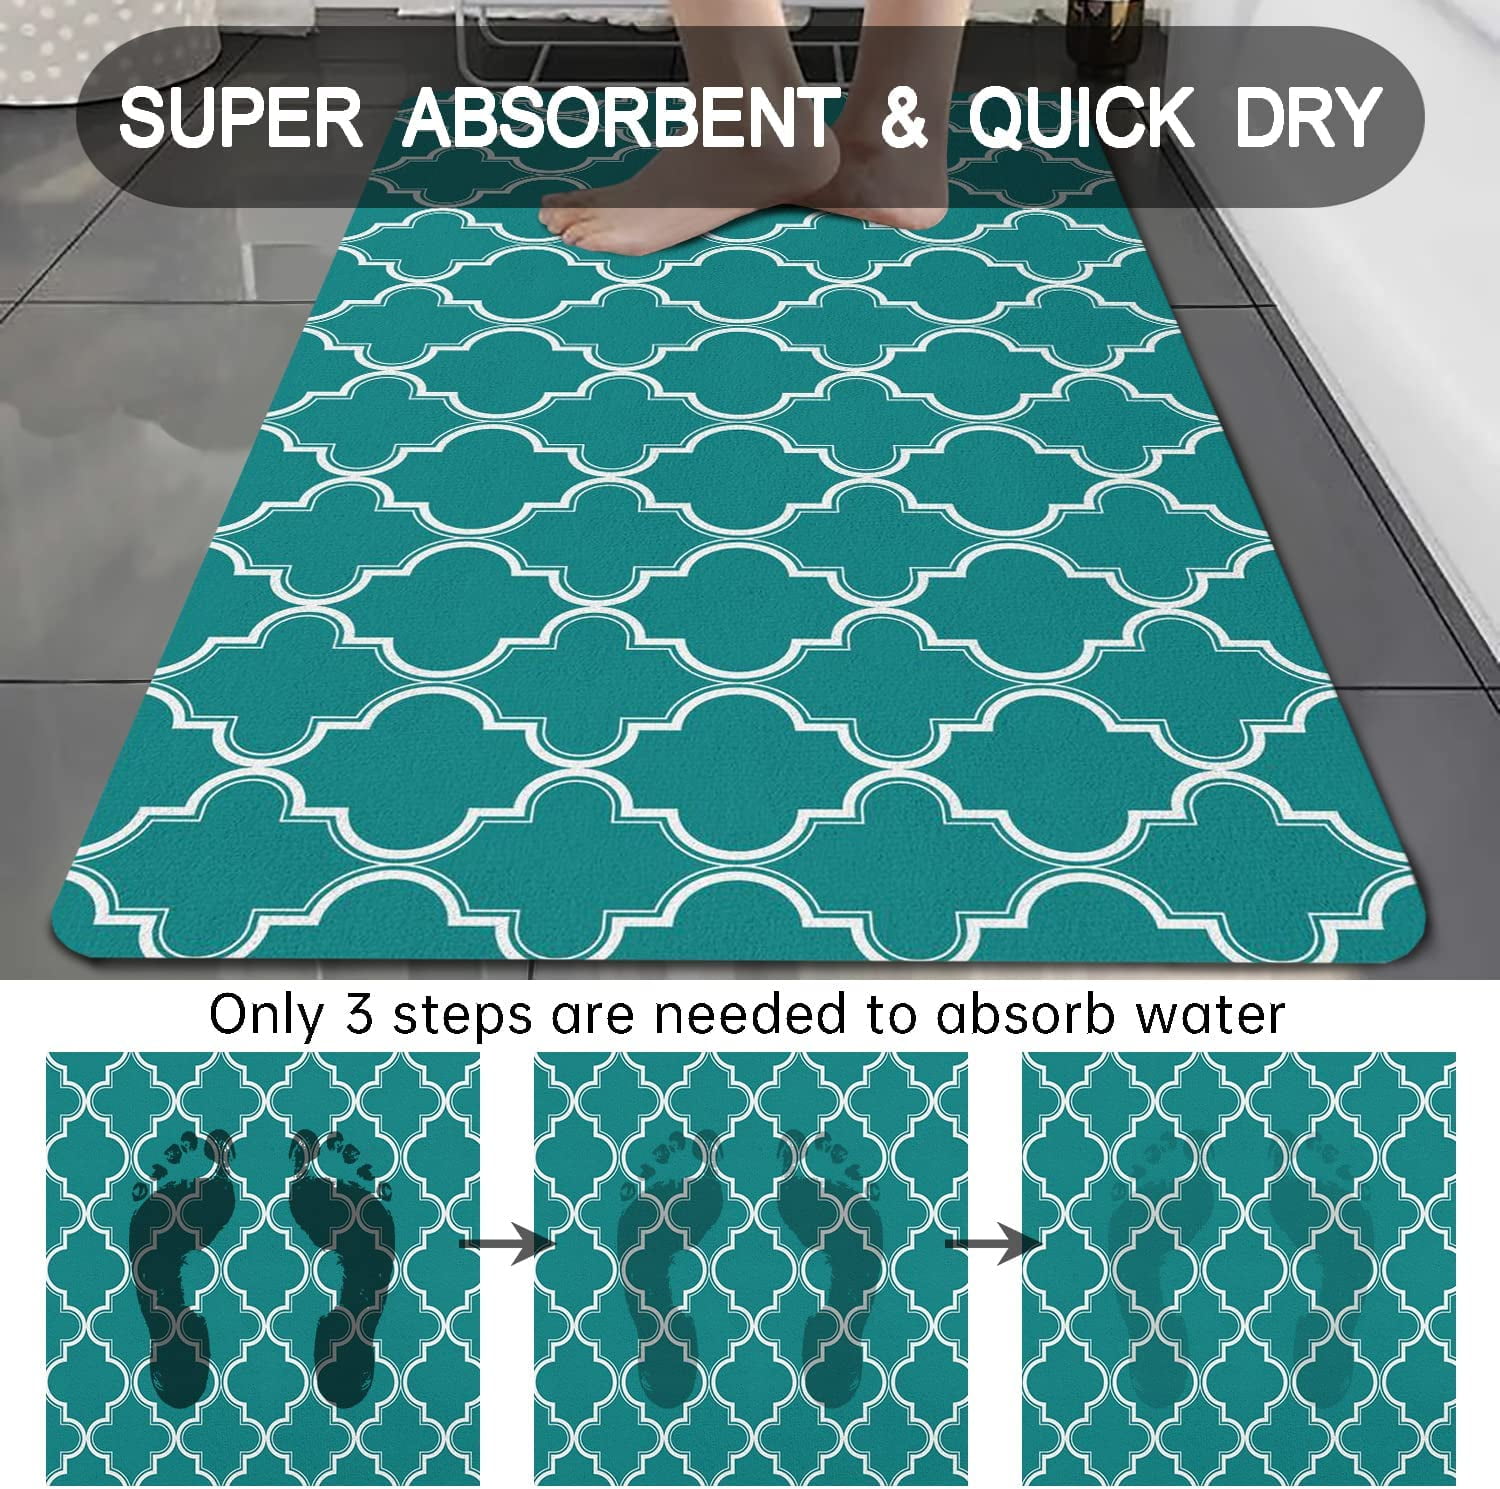  DEXI Bath Mat Rugs Bathroom Floor Mat Super Absorbent Ultra  Thin Low Profile Non Slip Quick Dry Washable Carpet for Sink Shower Toilet,  17x43 Turquoise Green : Home & Kitchen